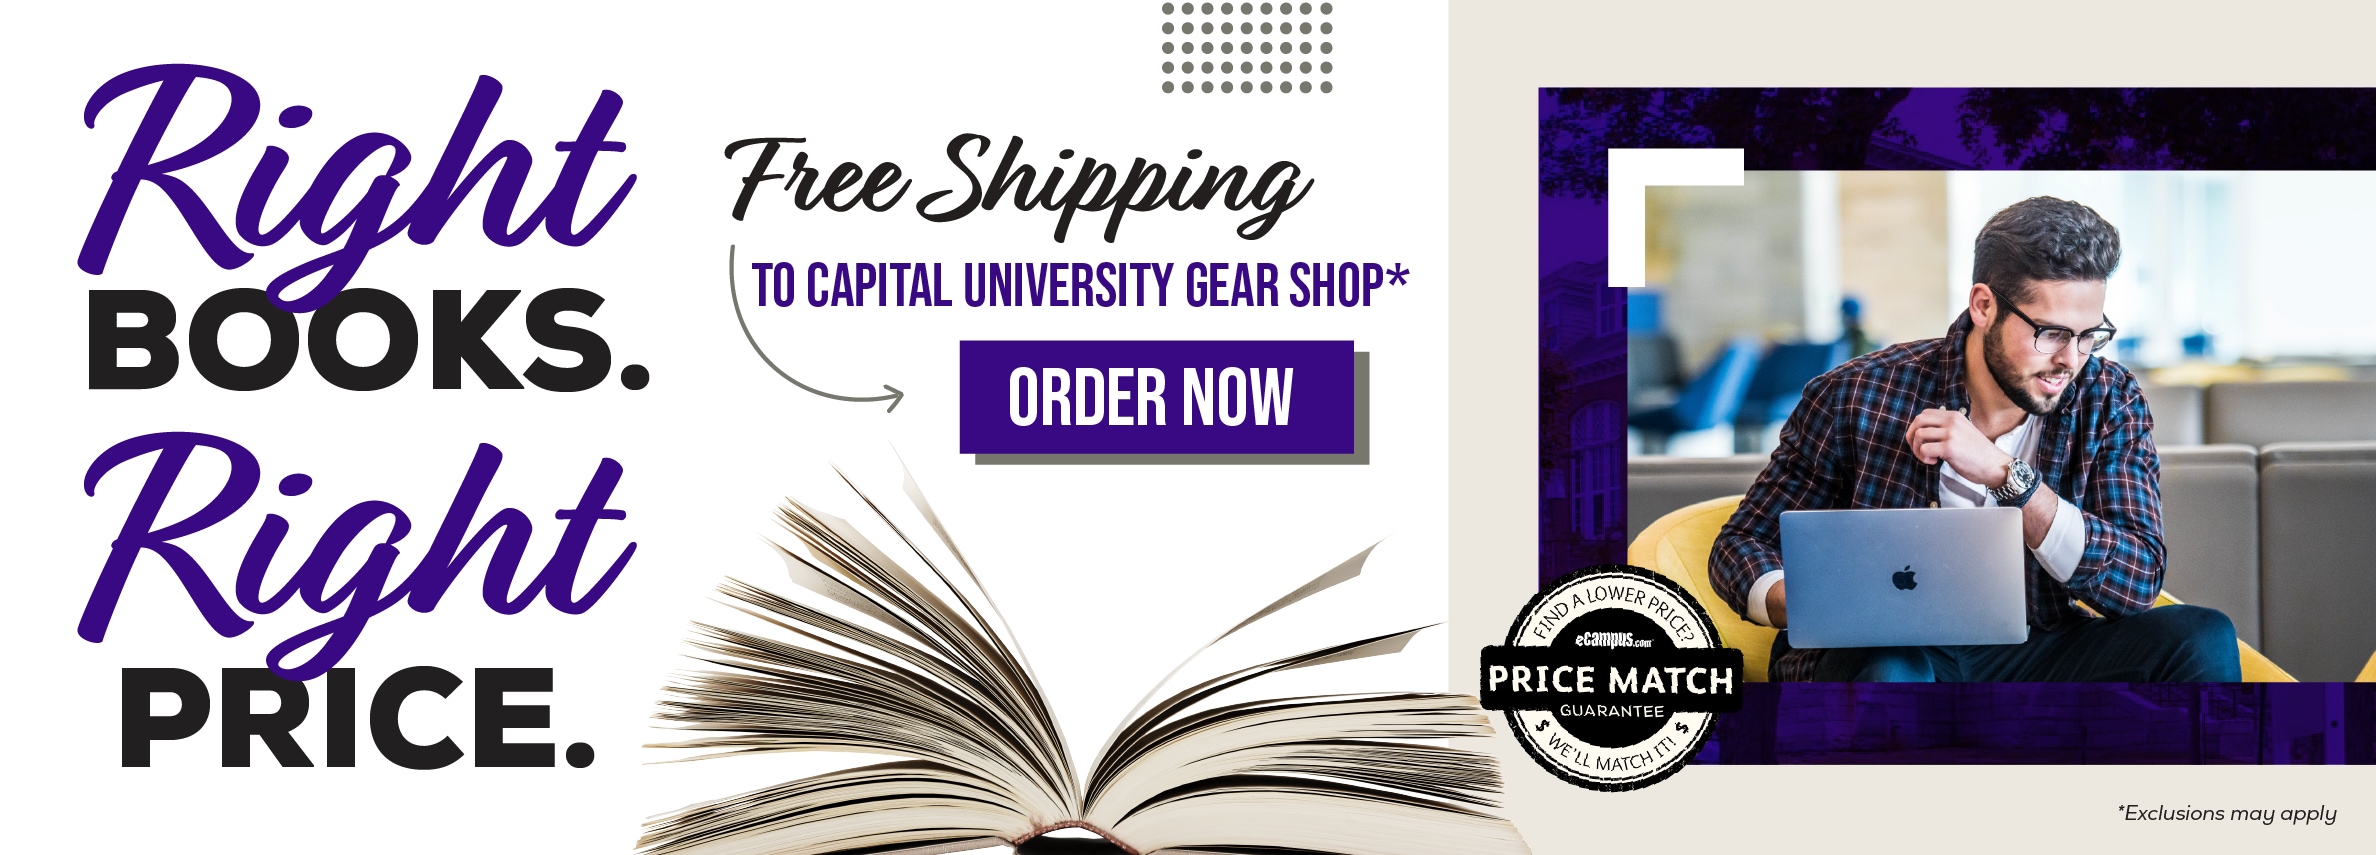 Right books. Right price. Free shipping to Capital University Gear Shop.* Order now. Price Match Guarantee. *Exclusions may apply.